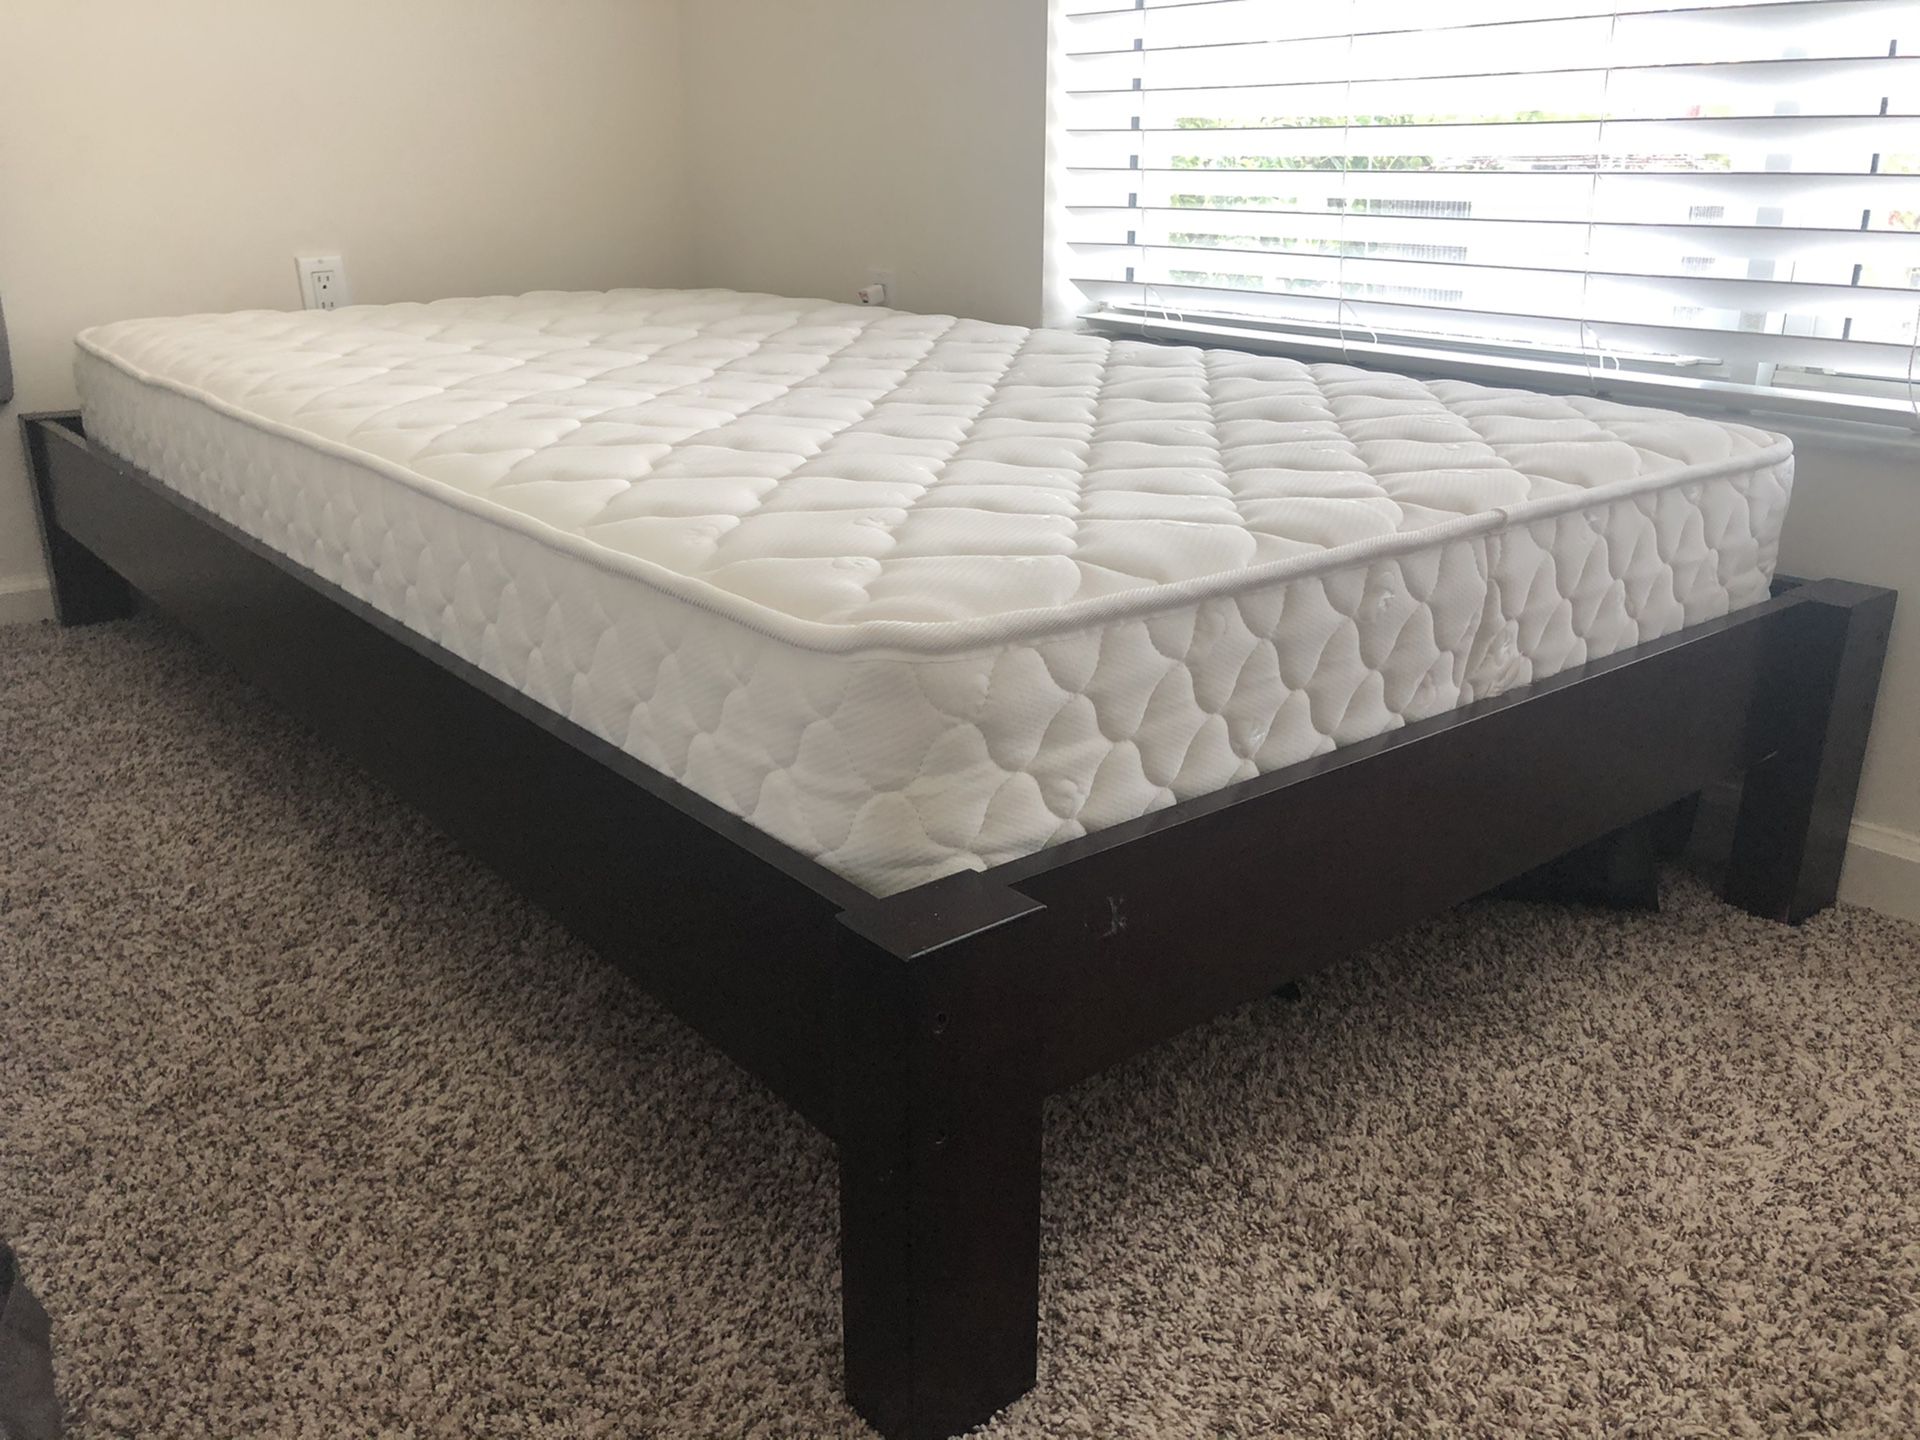 Two Twin bed with mattress, wood base, great condition, used only 6 months